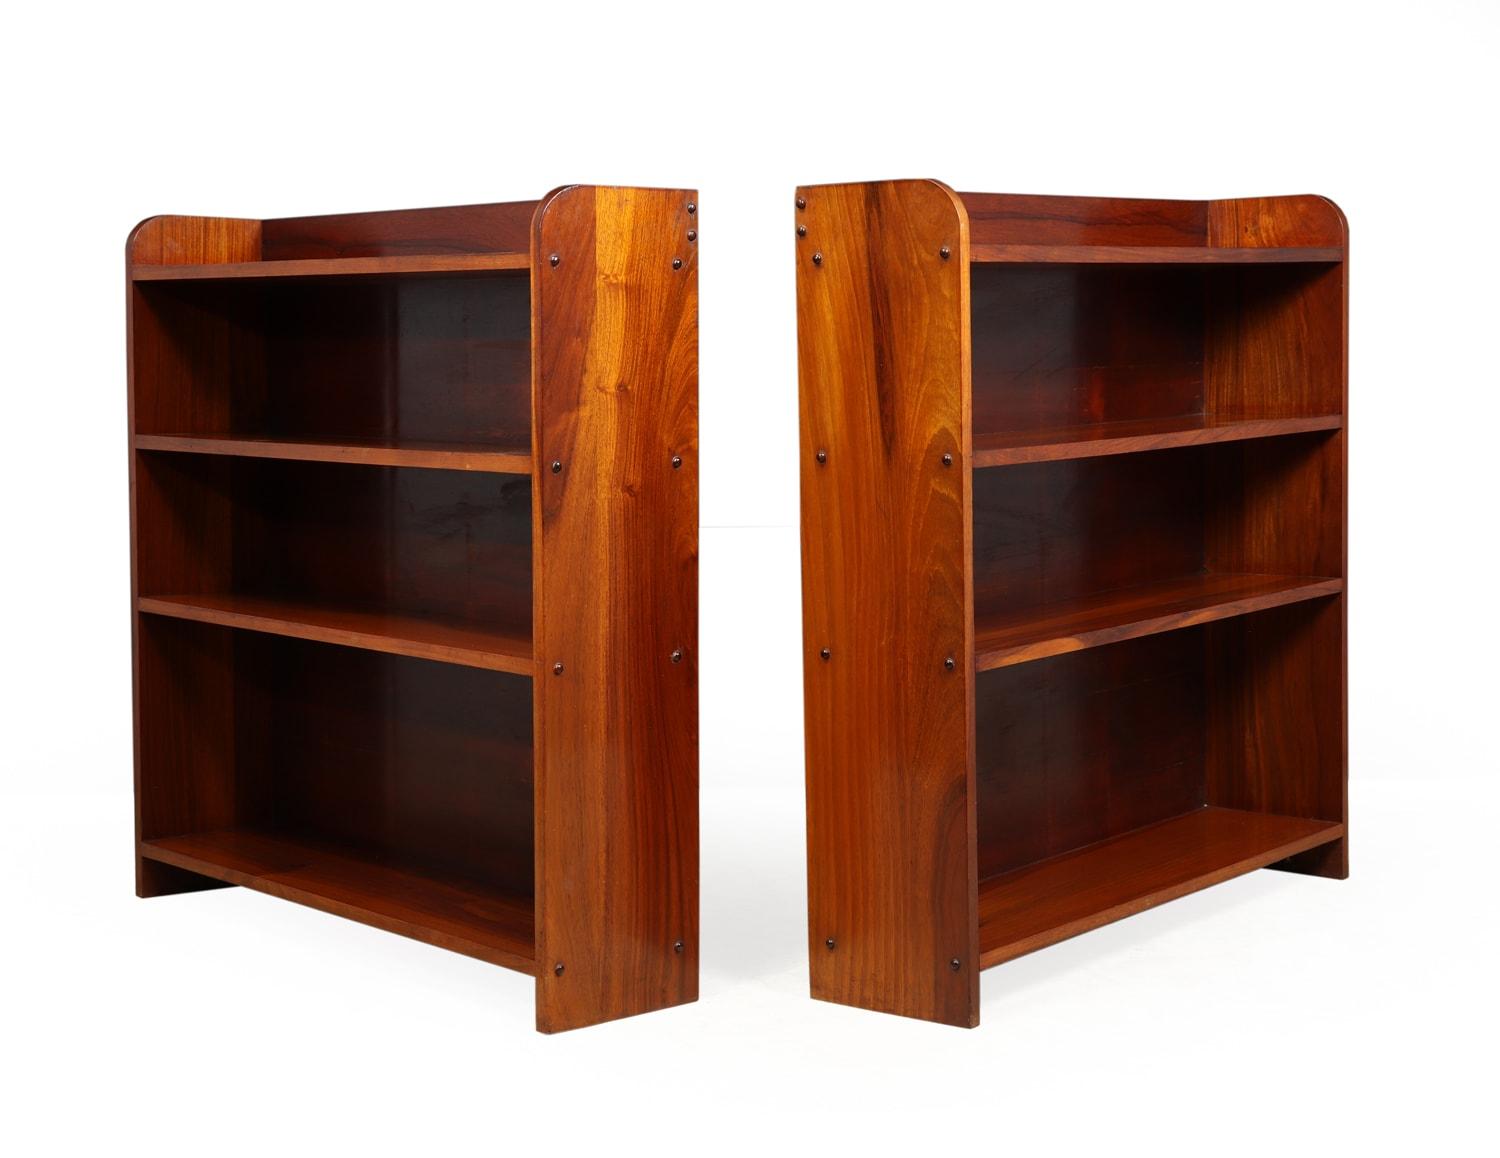 A pair of midcentury Brazilian bookcases in Jacaranda

A great matching pair of open bookcases Produced in the 1960s by fabrica de moveis bandeirante these bookcases are in Solid Jacaranda and in very good condition,

Age: 1960

Style: